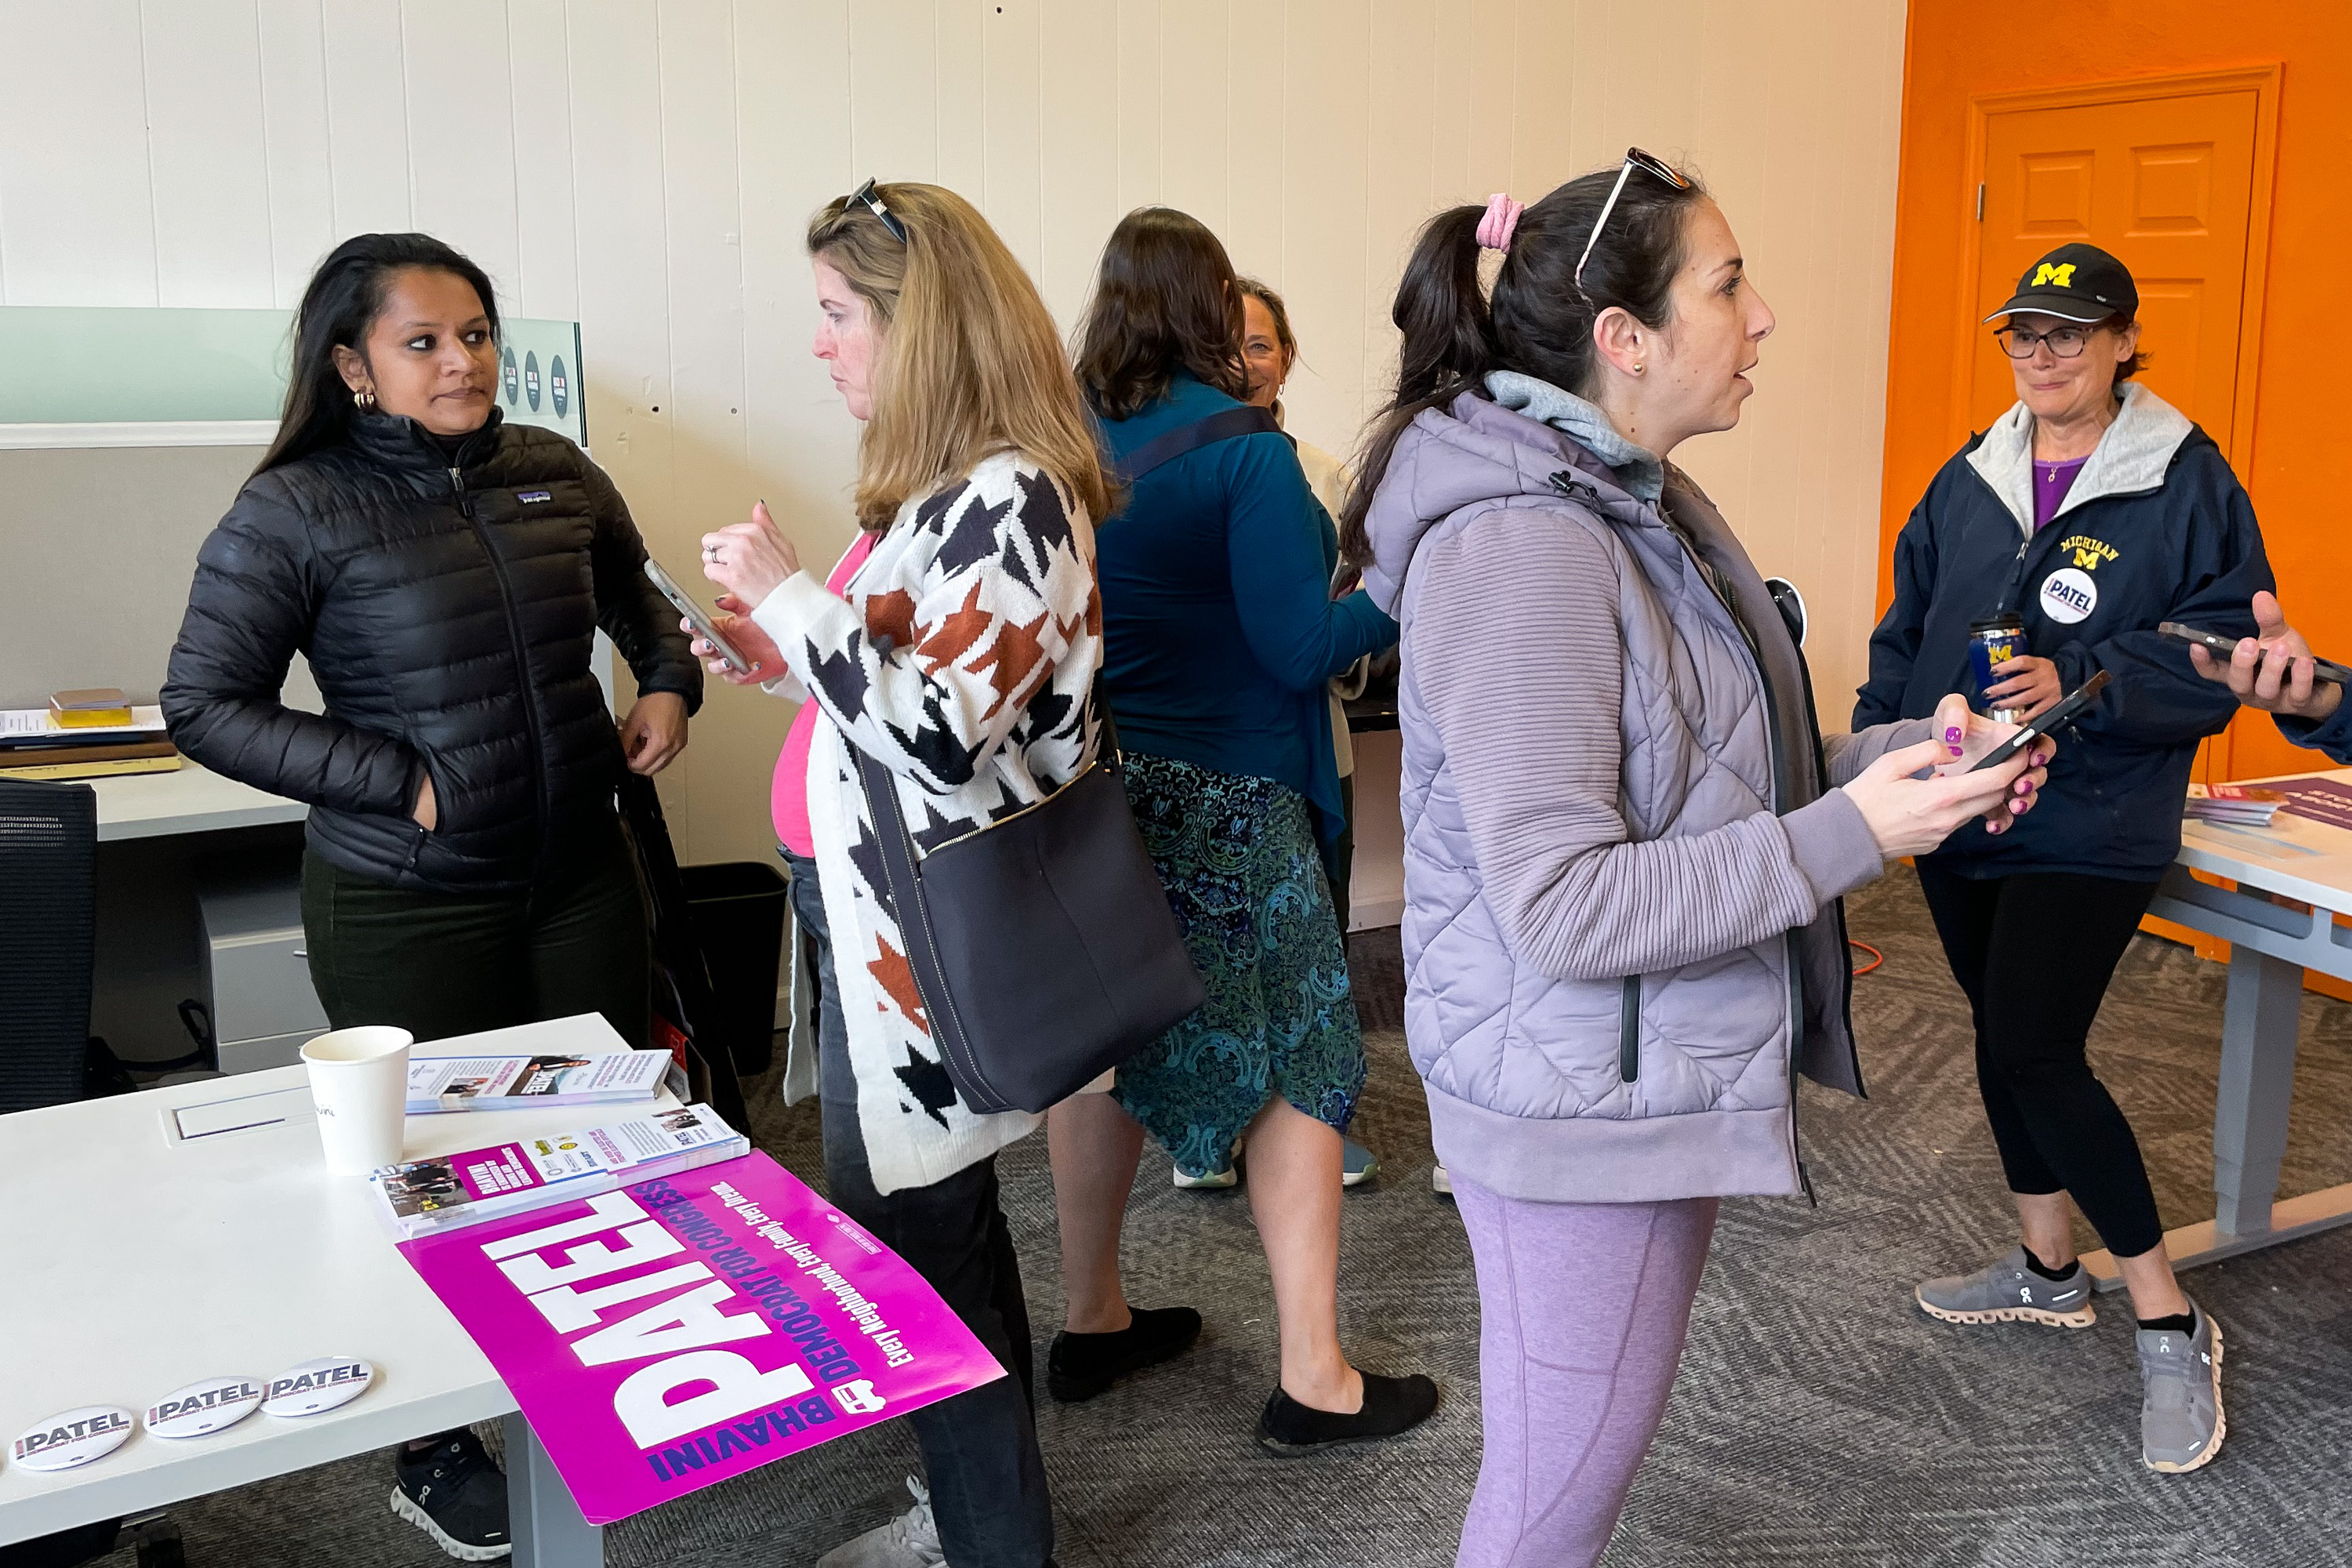 Bhavini Patel (left) talks to canvassers at her campaign headquarters in Pittsburgh's Squirrel Hill neighborhood on April 13.